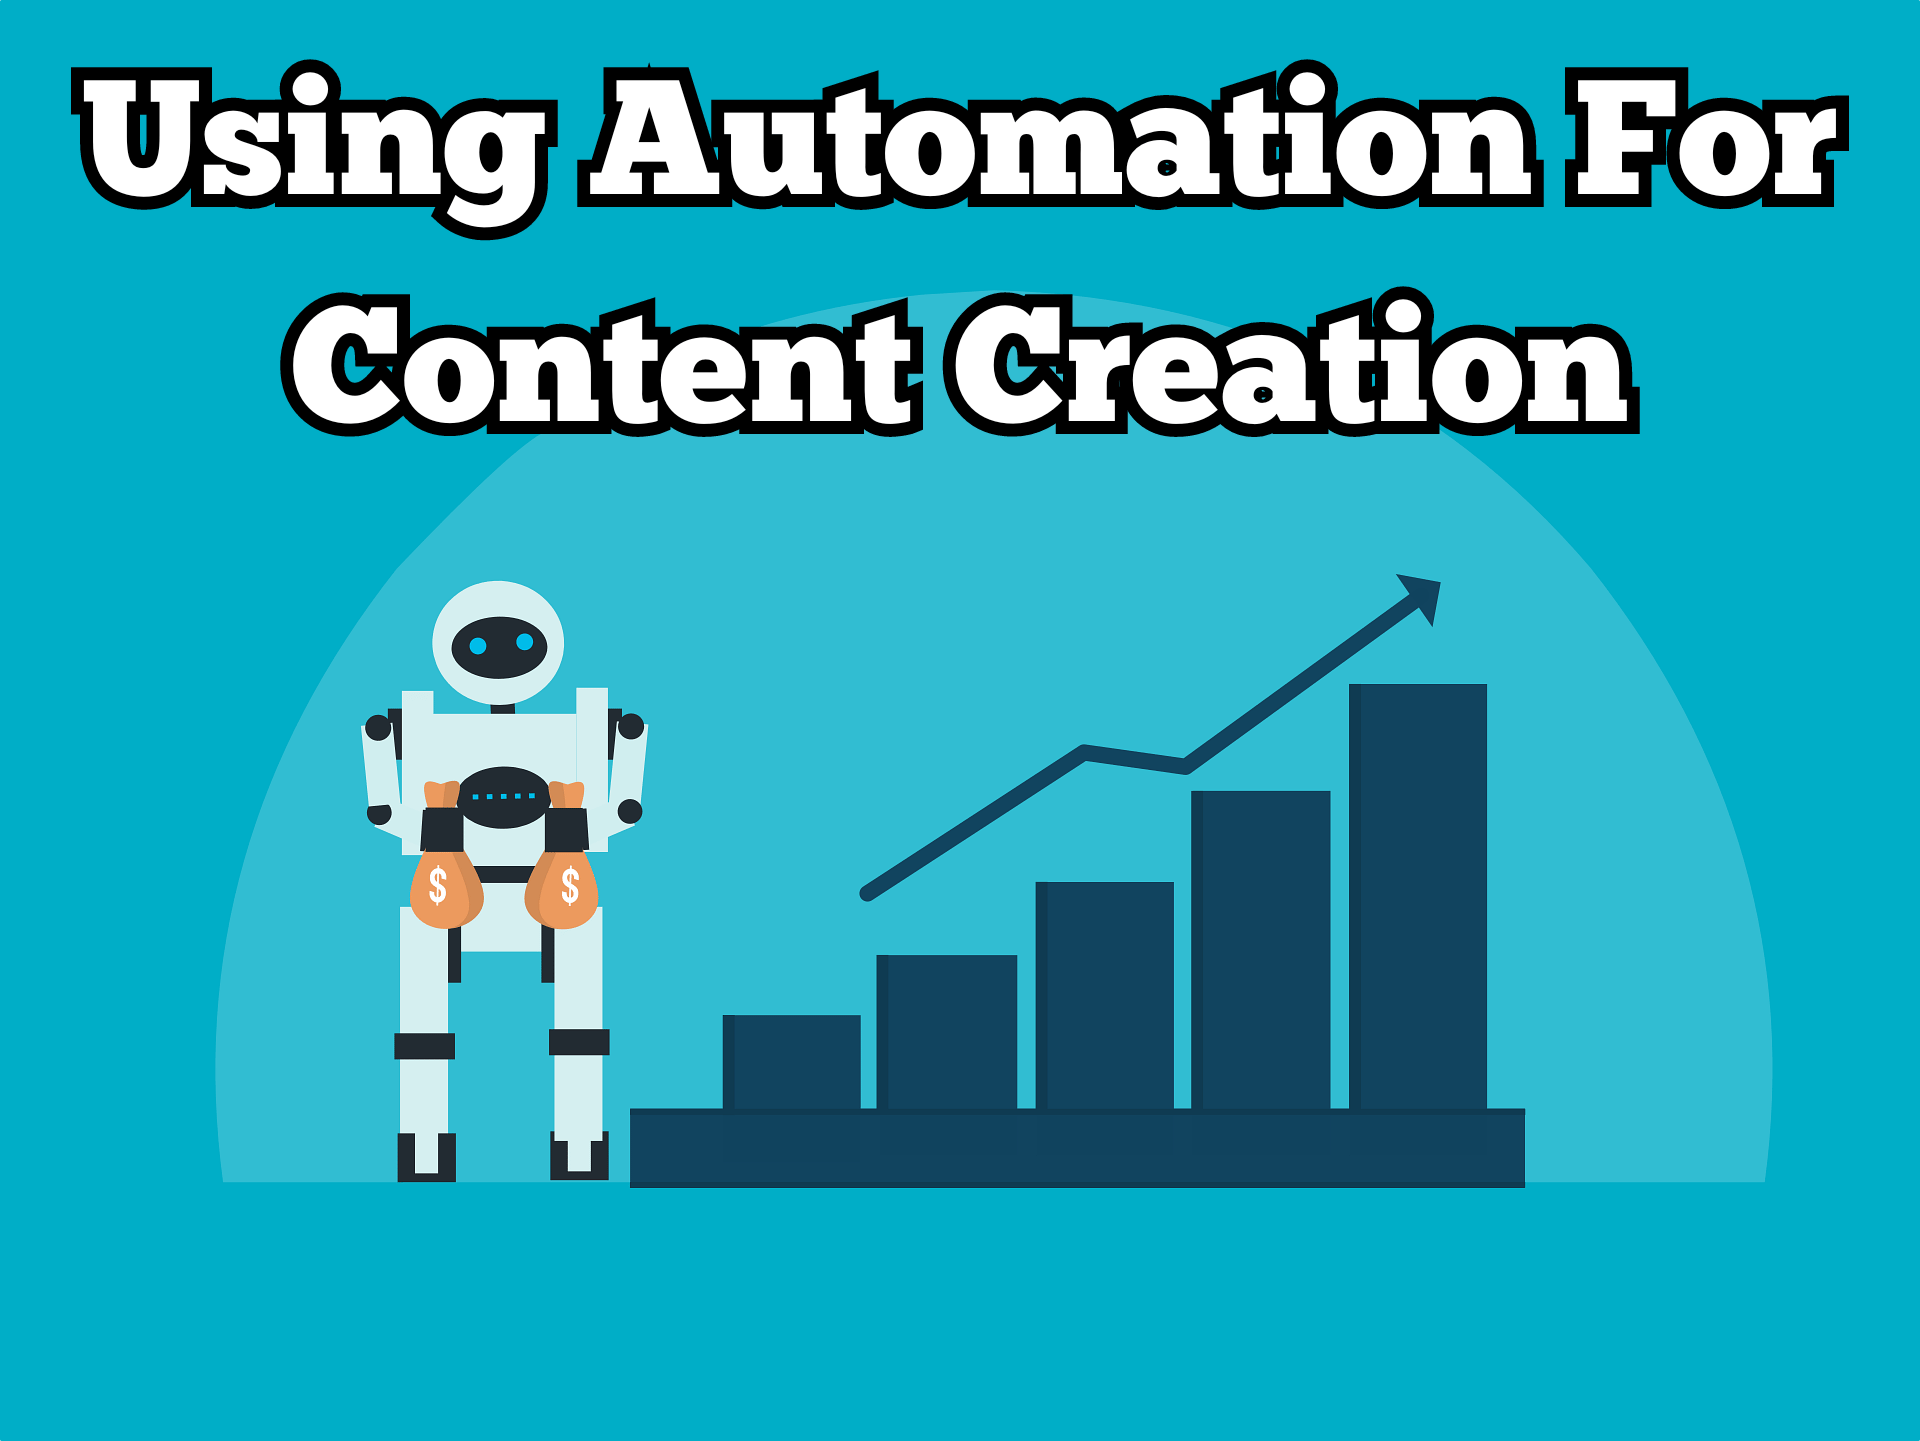 Graphic of ai robot gaining you more traffic due to automated content creation. Text overlay says: Using automation for content creation.